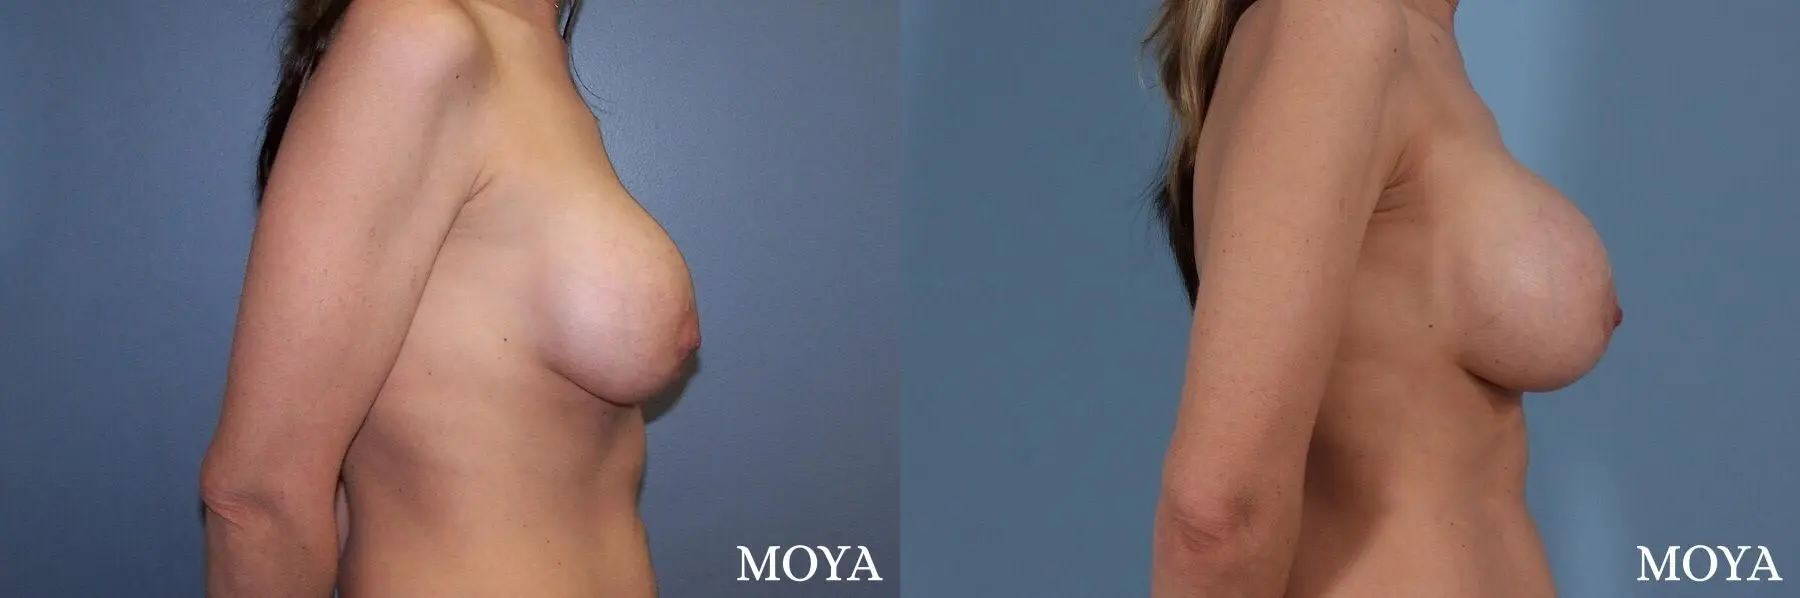 Breast Implant Exchange: Patient 2 - Before and After 2